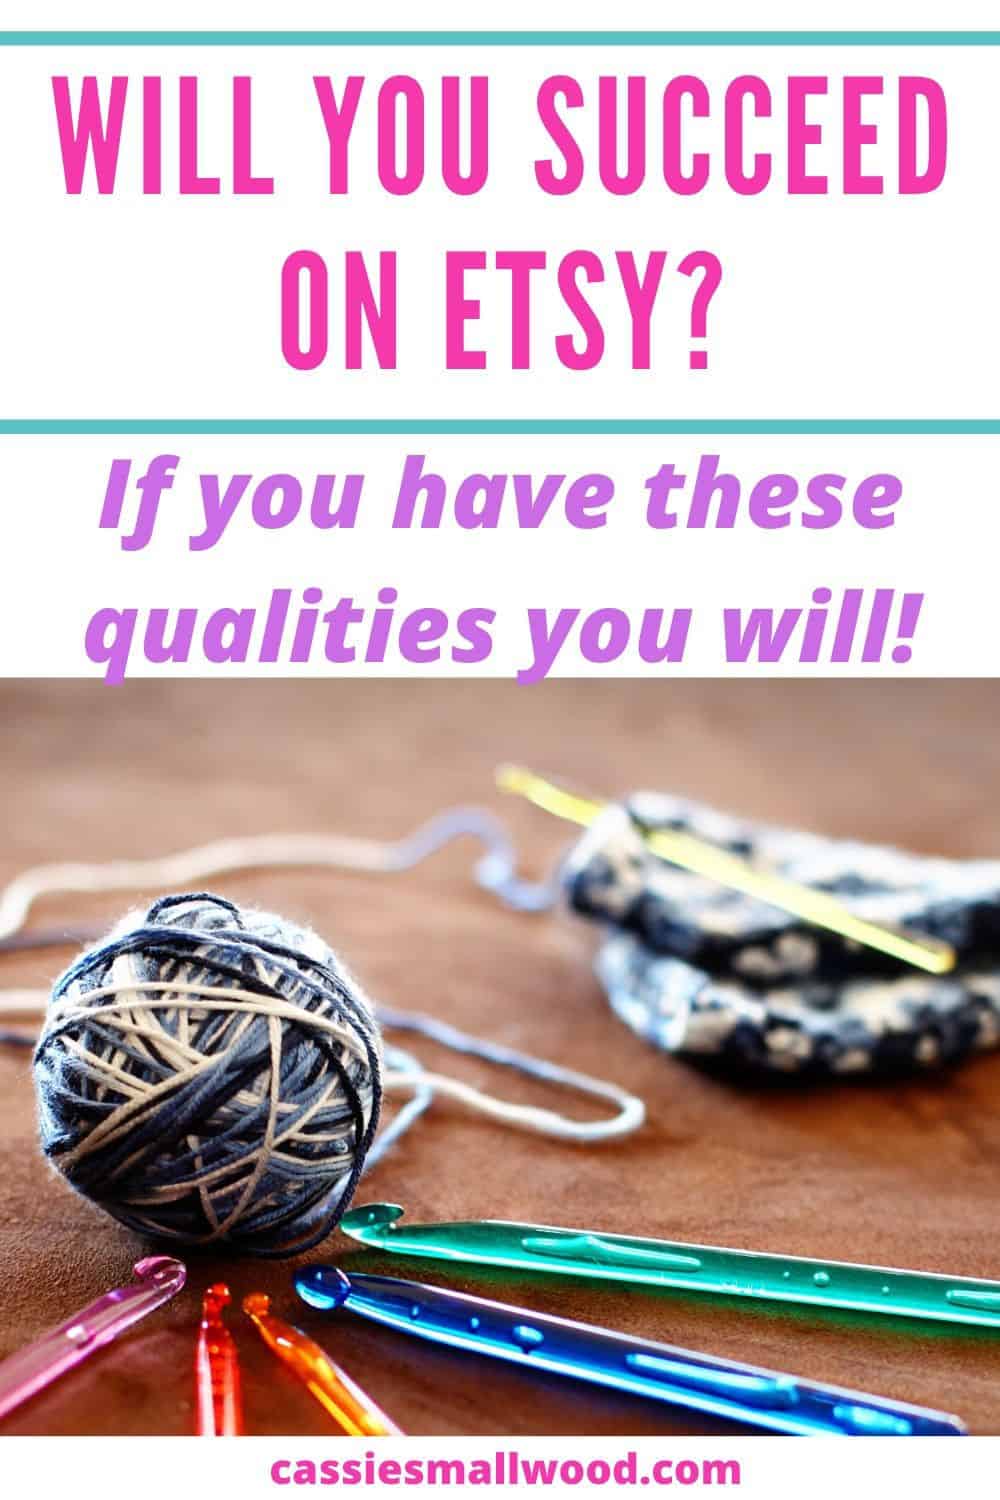 Will your craft business be a success? 5 signs your handmade business will be successful. Tips for selling on Etsy. Increase Etsy sales easily if you have these qualities to accomplish your goals selling crafts. #sellingonetsy #sellingcraftsonline